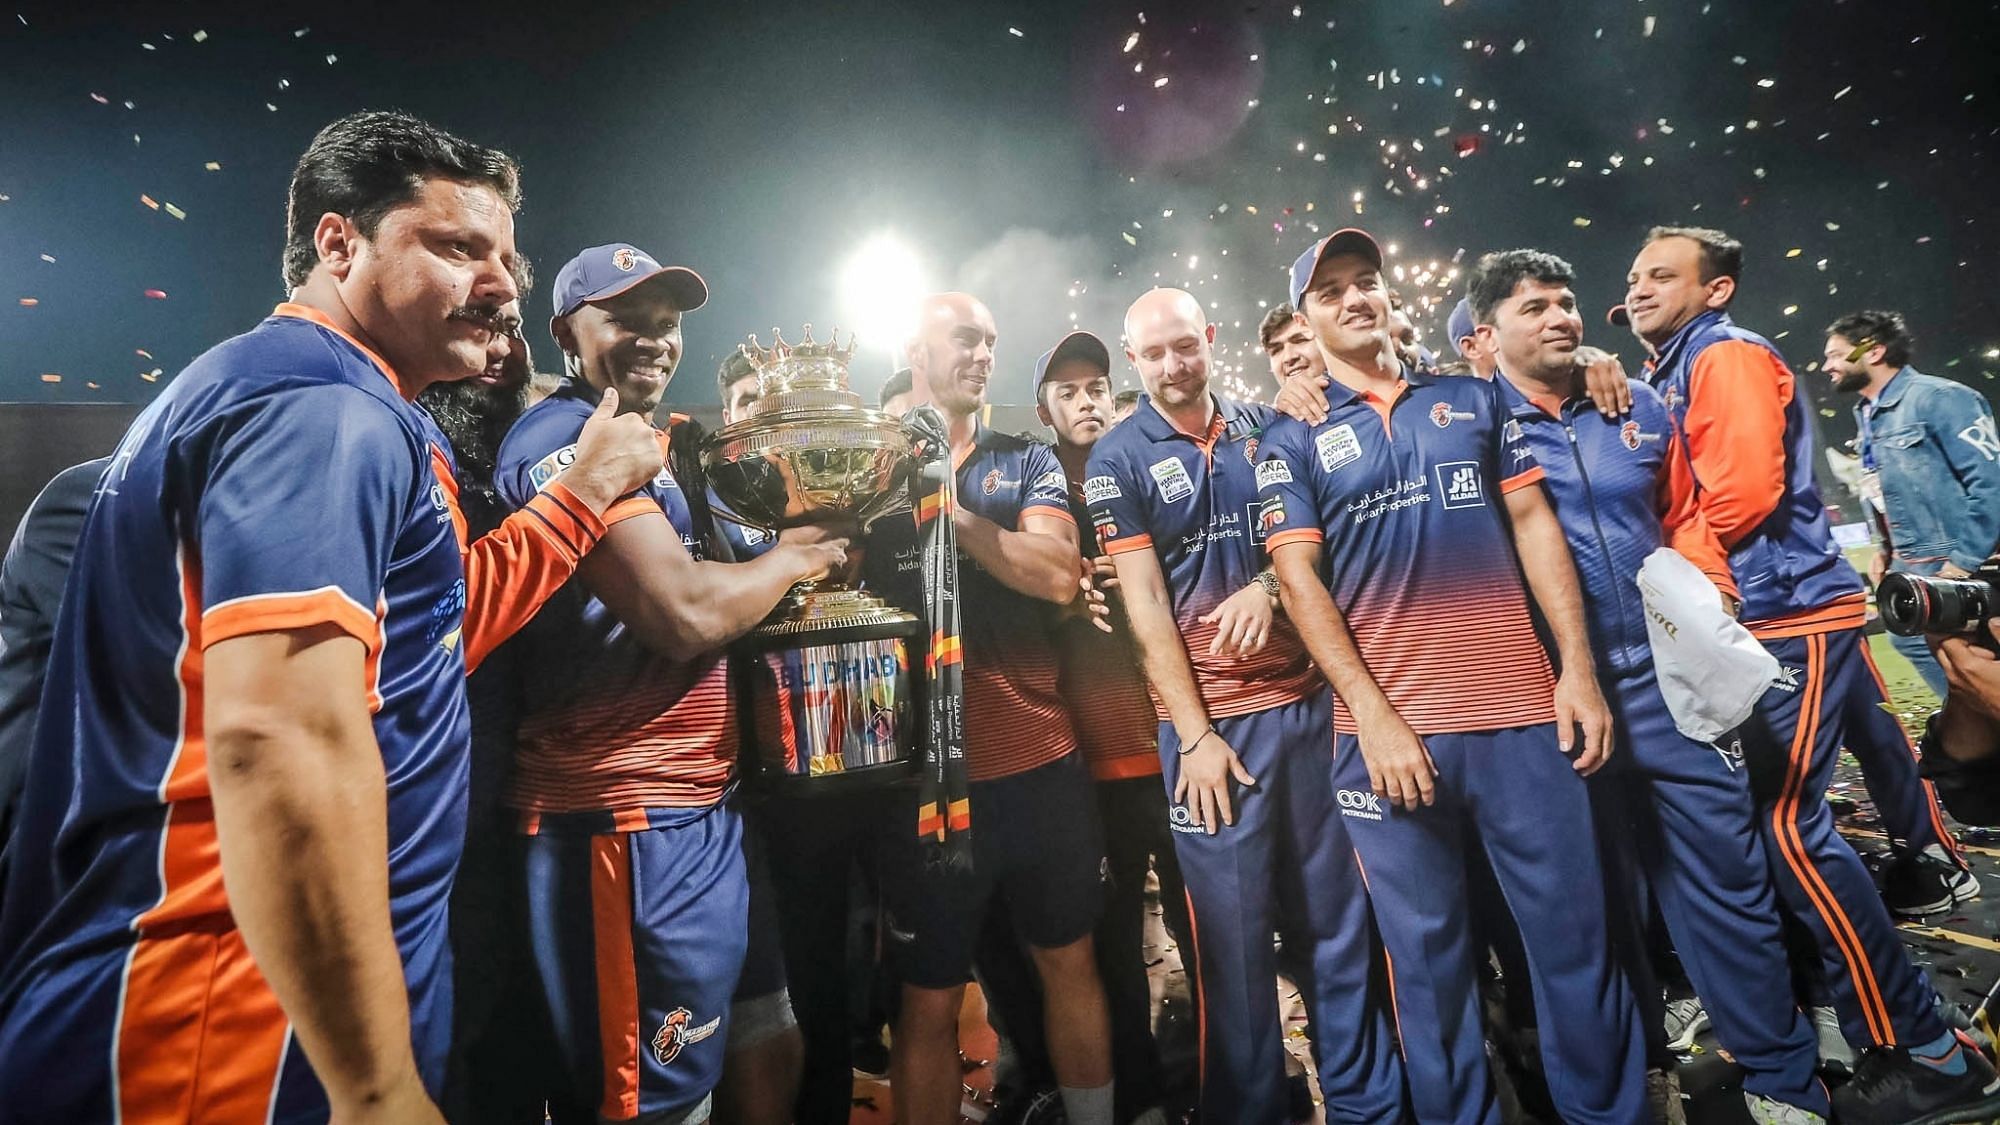 The Maratha Arabians won by 8 wickets in the finals.